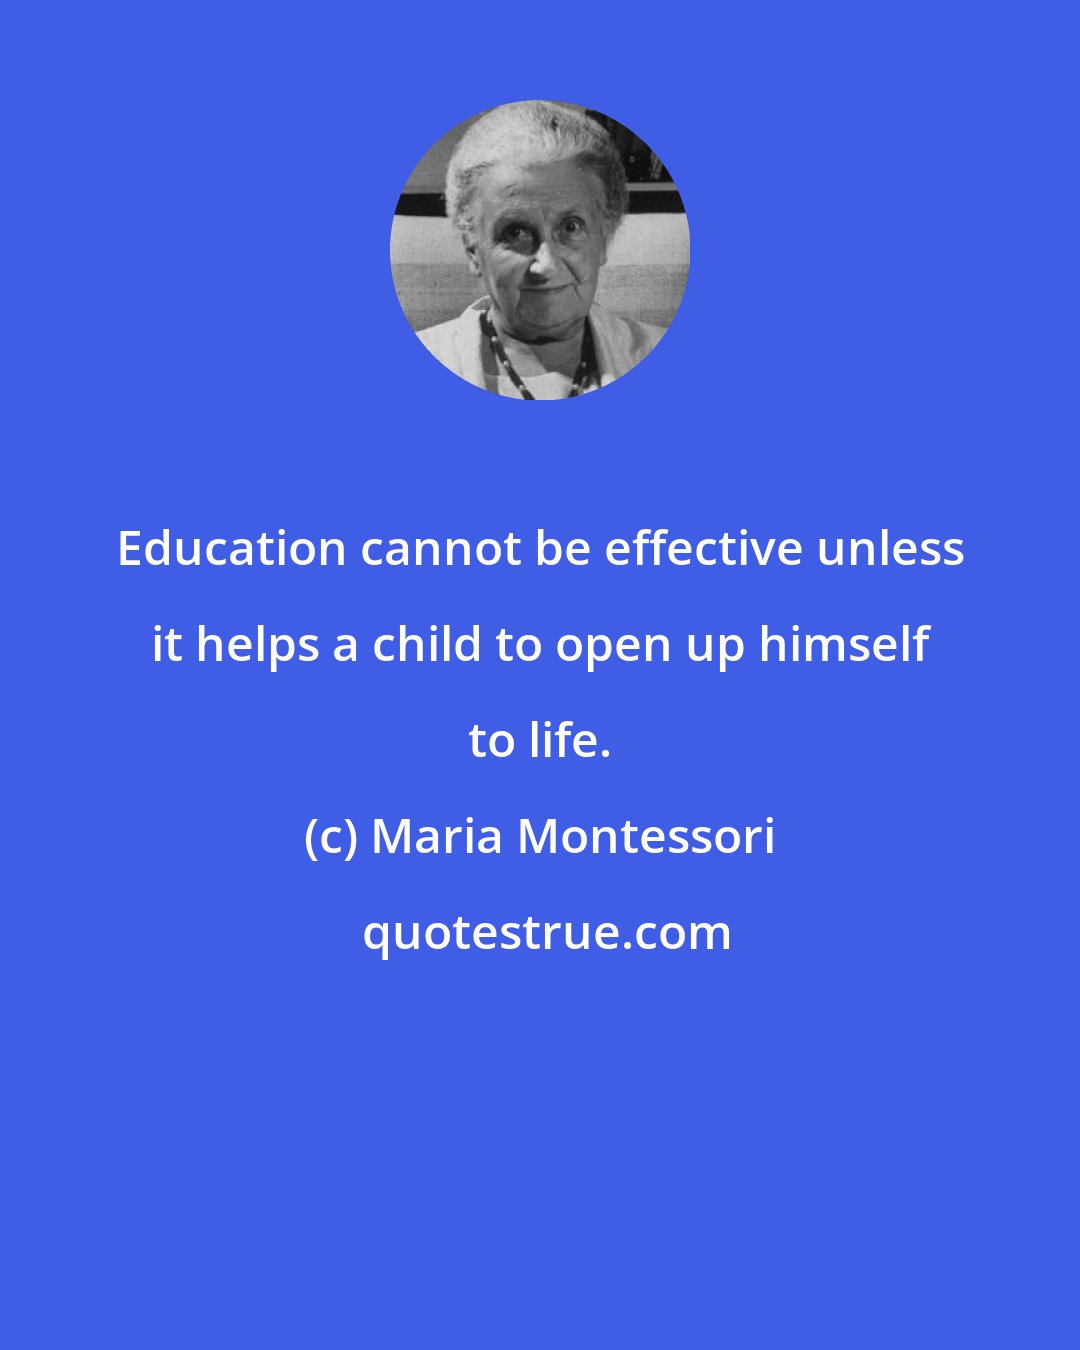 Maria Montessori: Education cannot be effective unless it helps a child to open up himself to life.